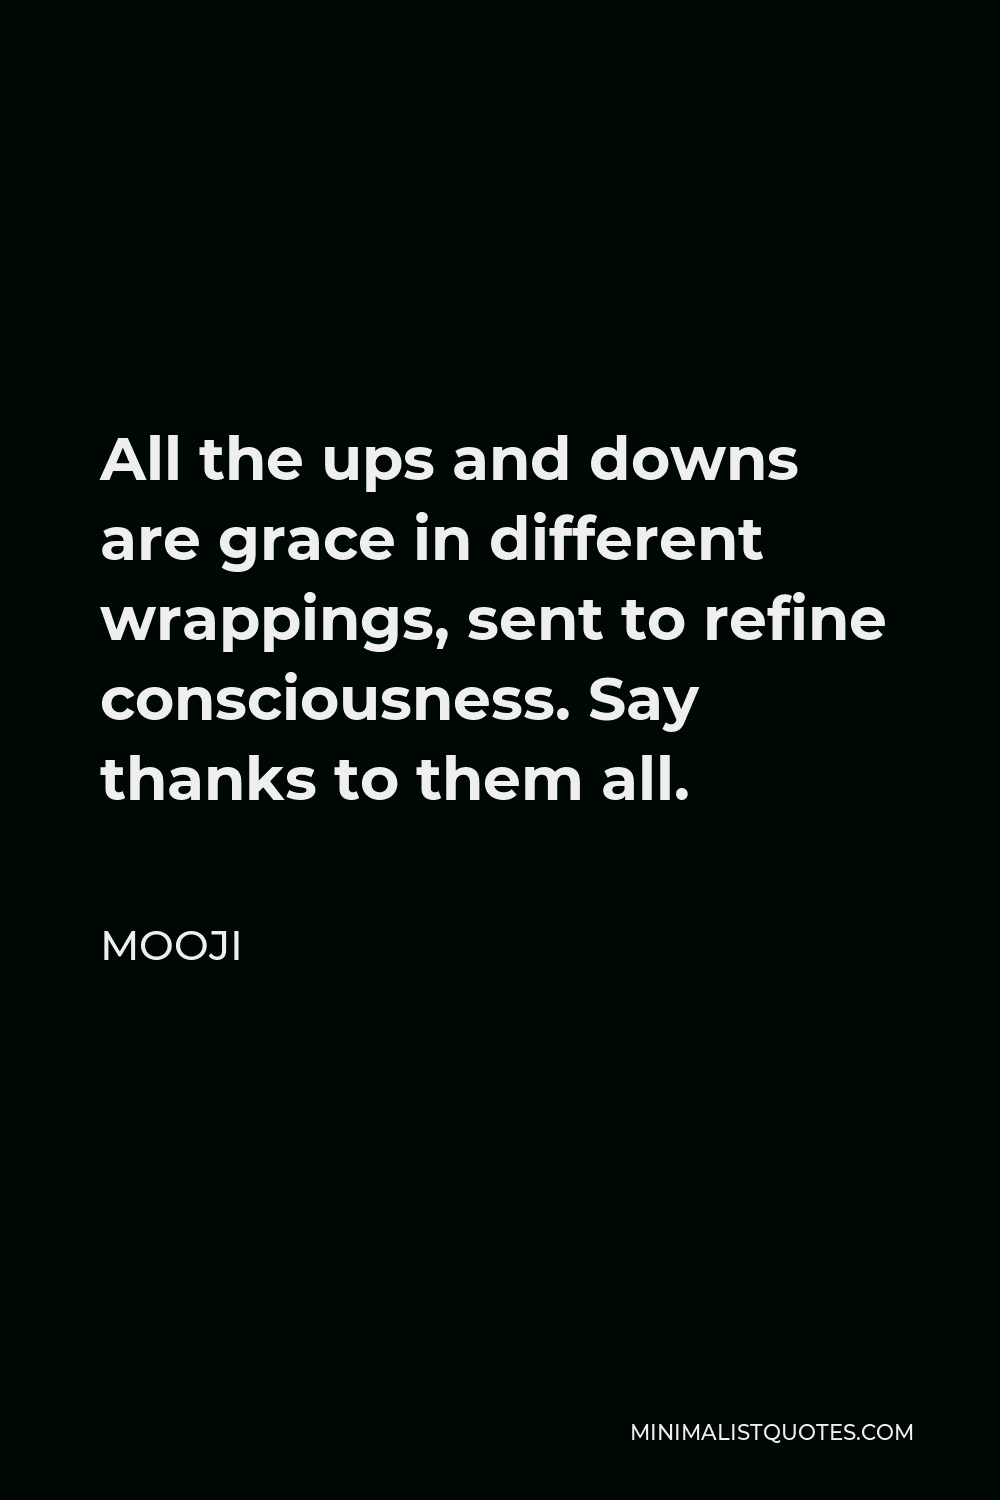 Mooji Quote - All the ups and downs are grace in different wrappings, sent to refine consciousness. Say thanks to them all.